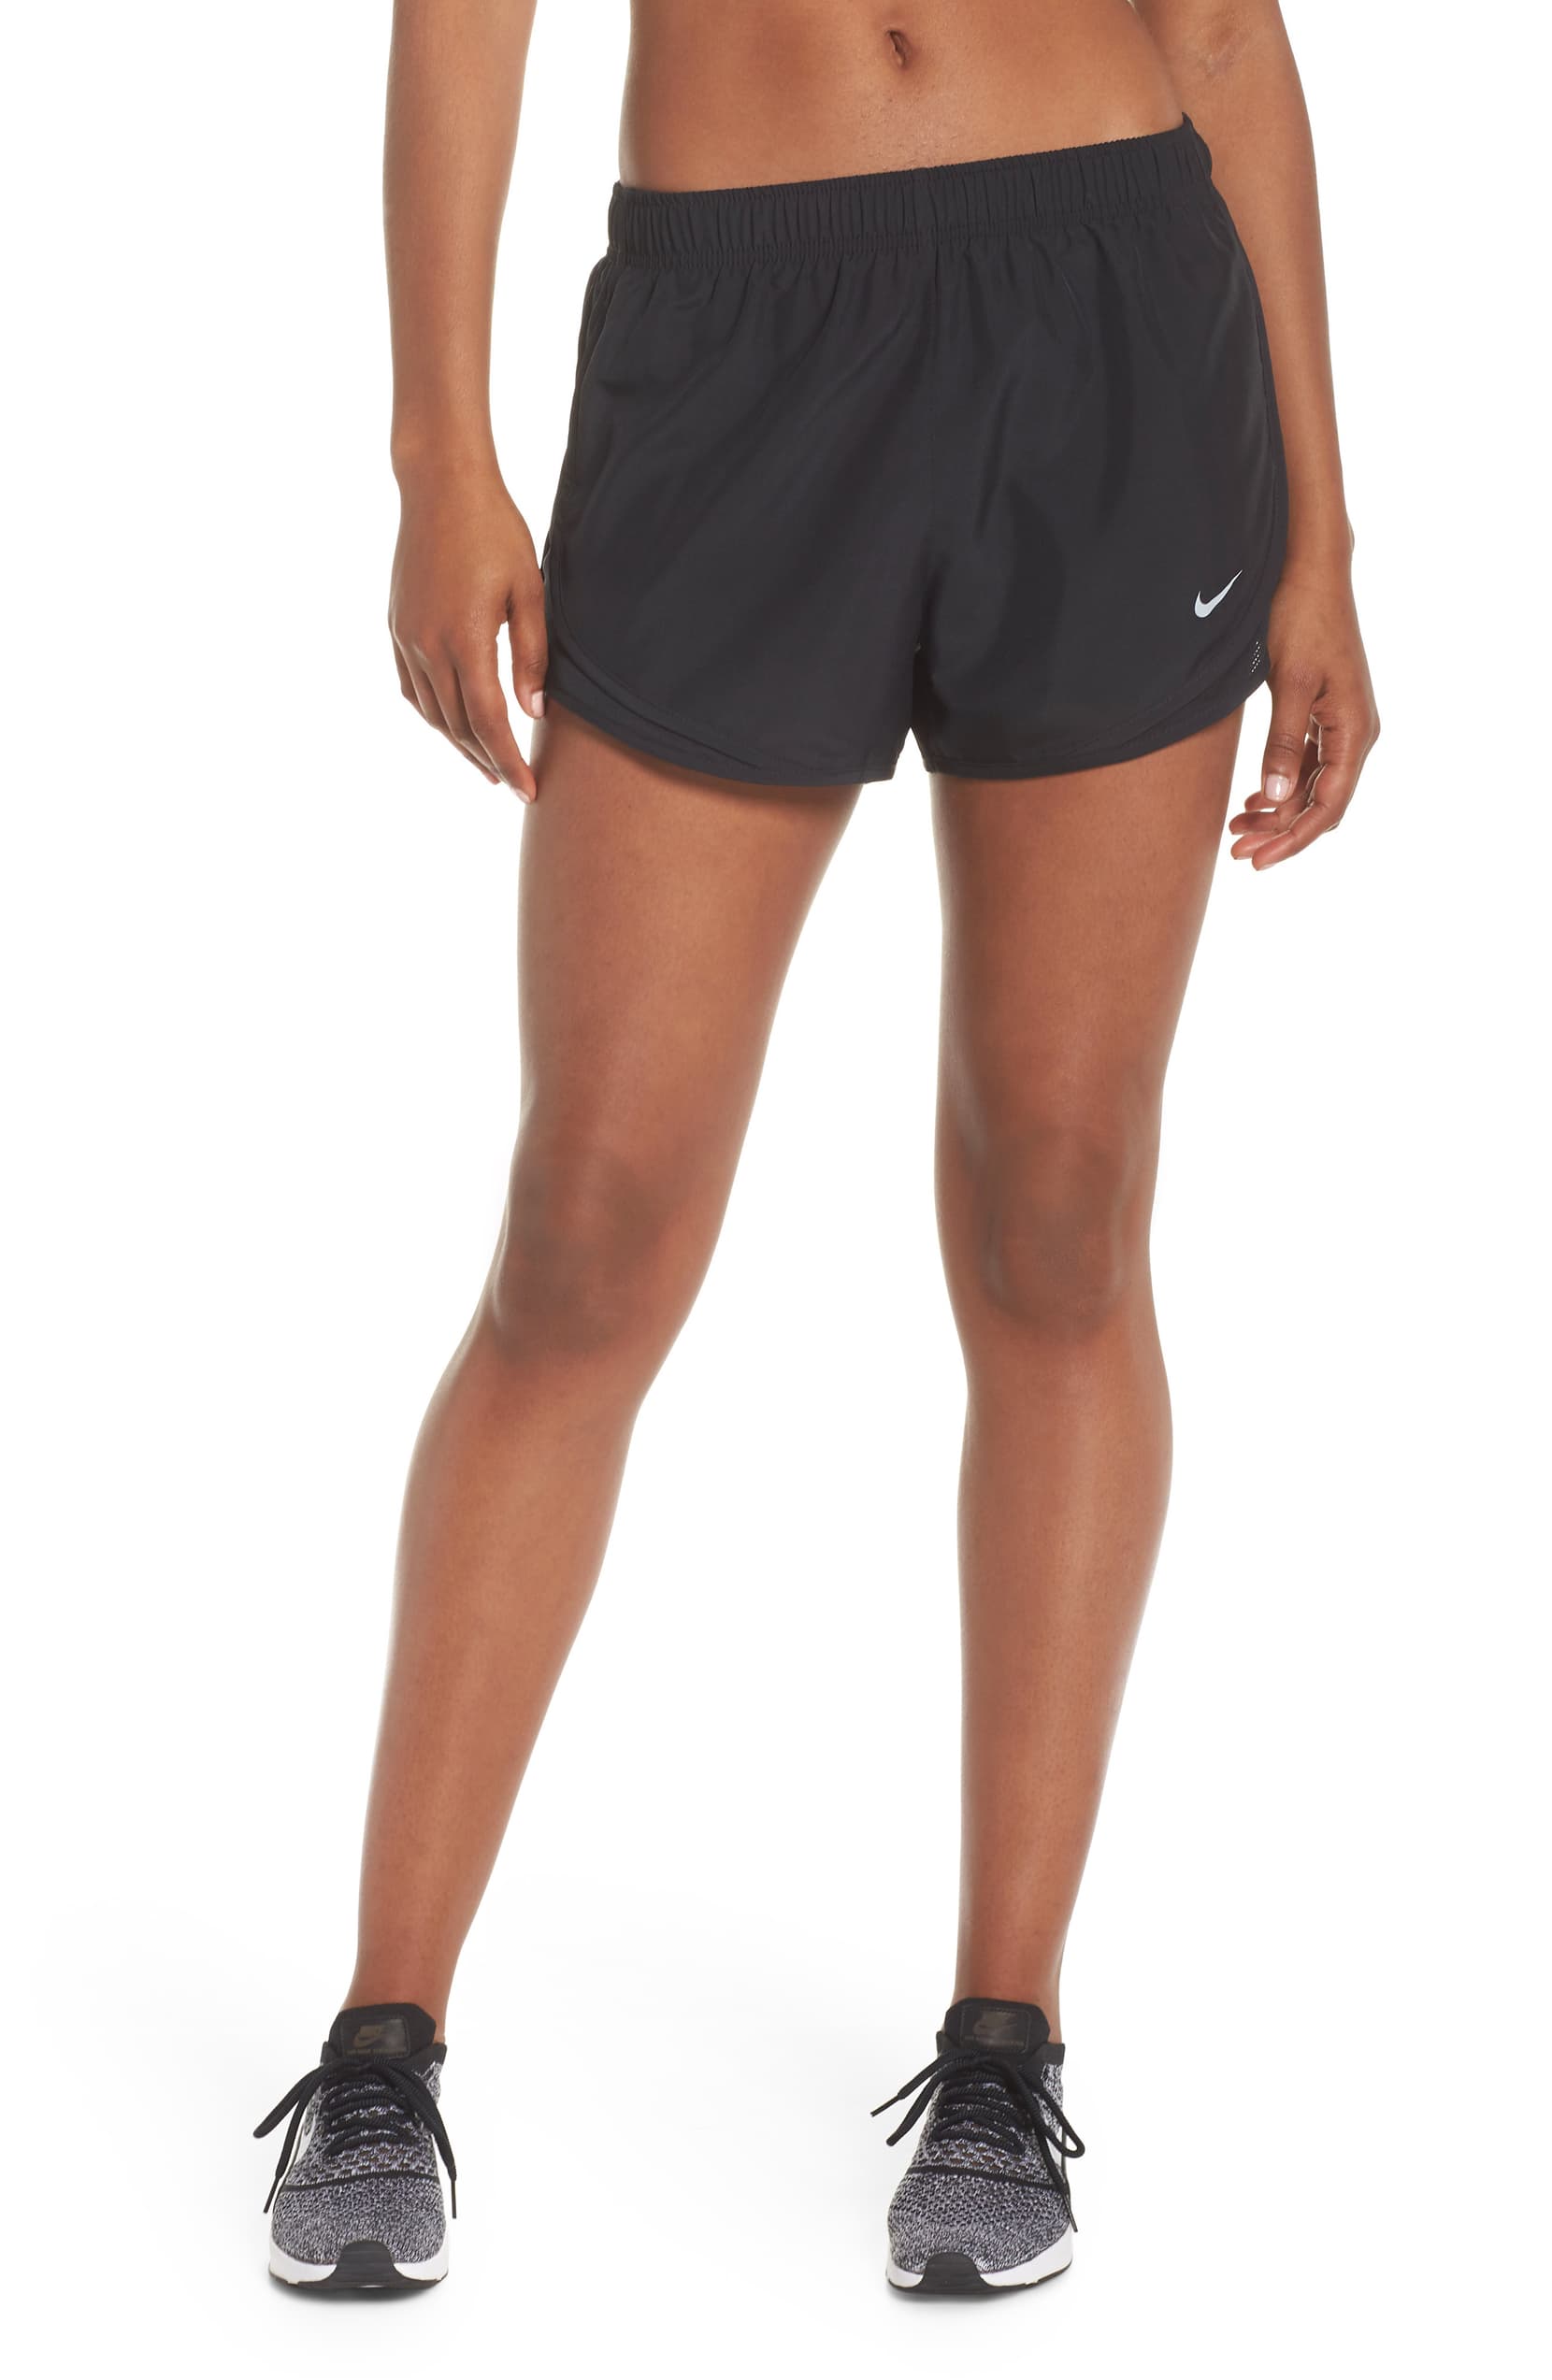 black athletic shorts outfit